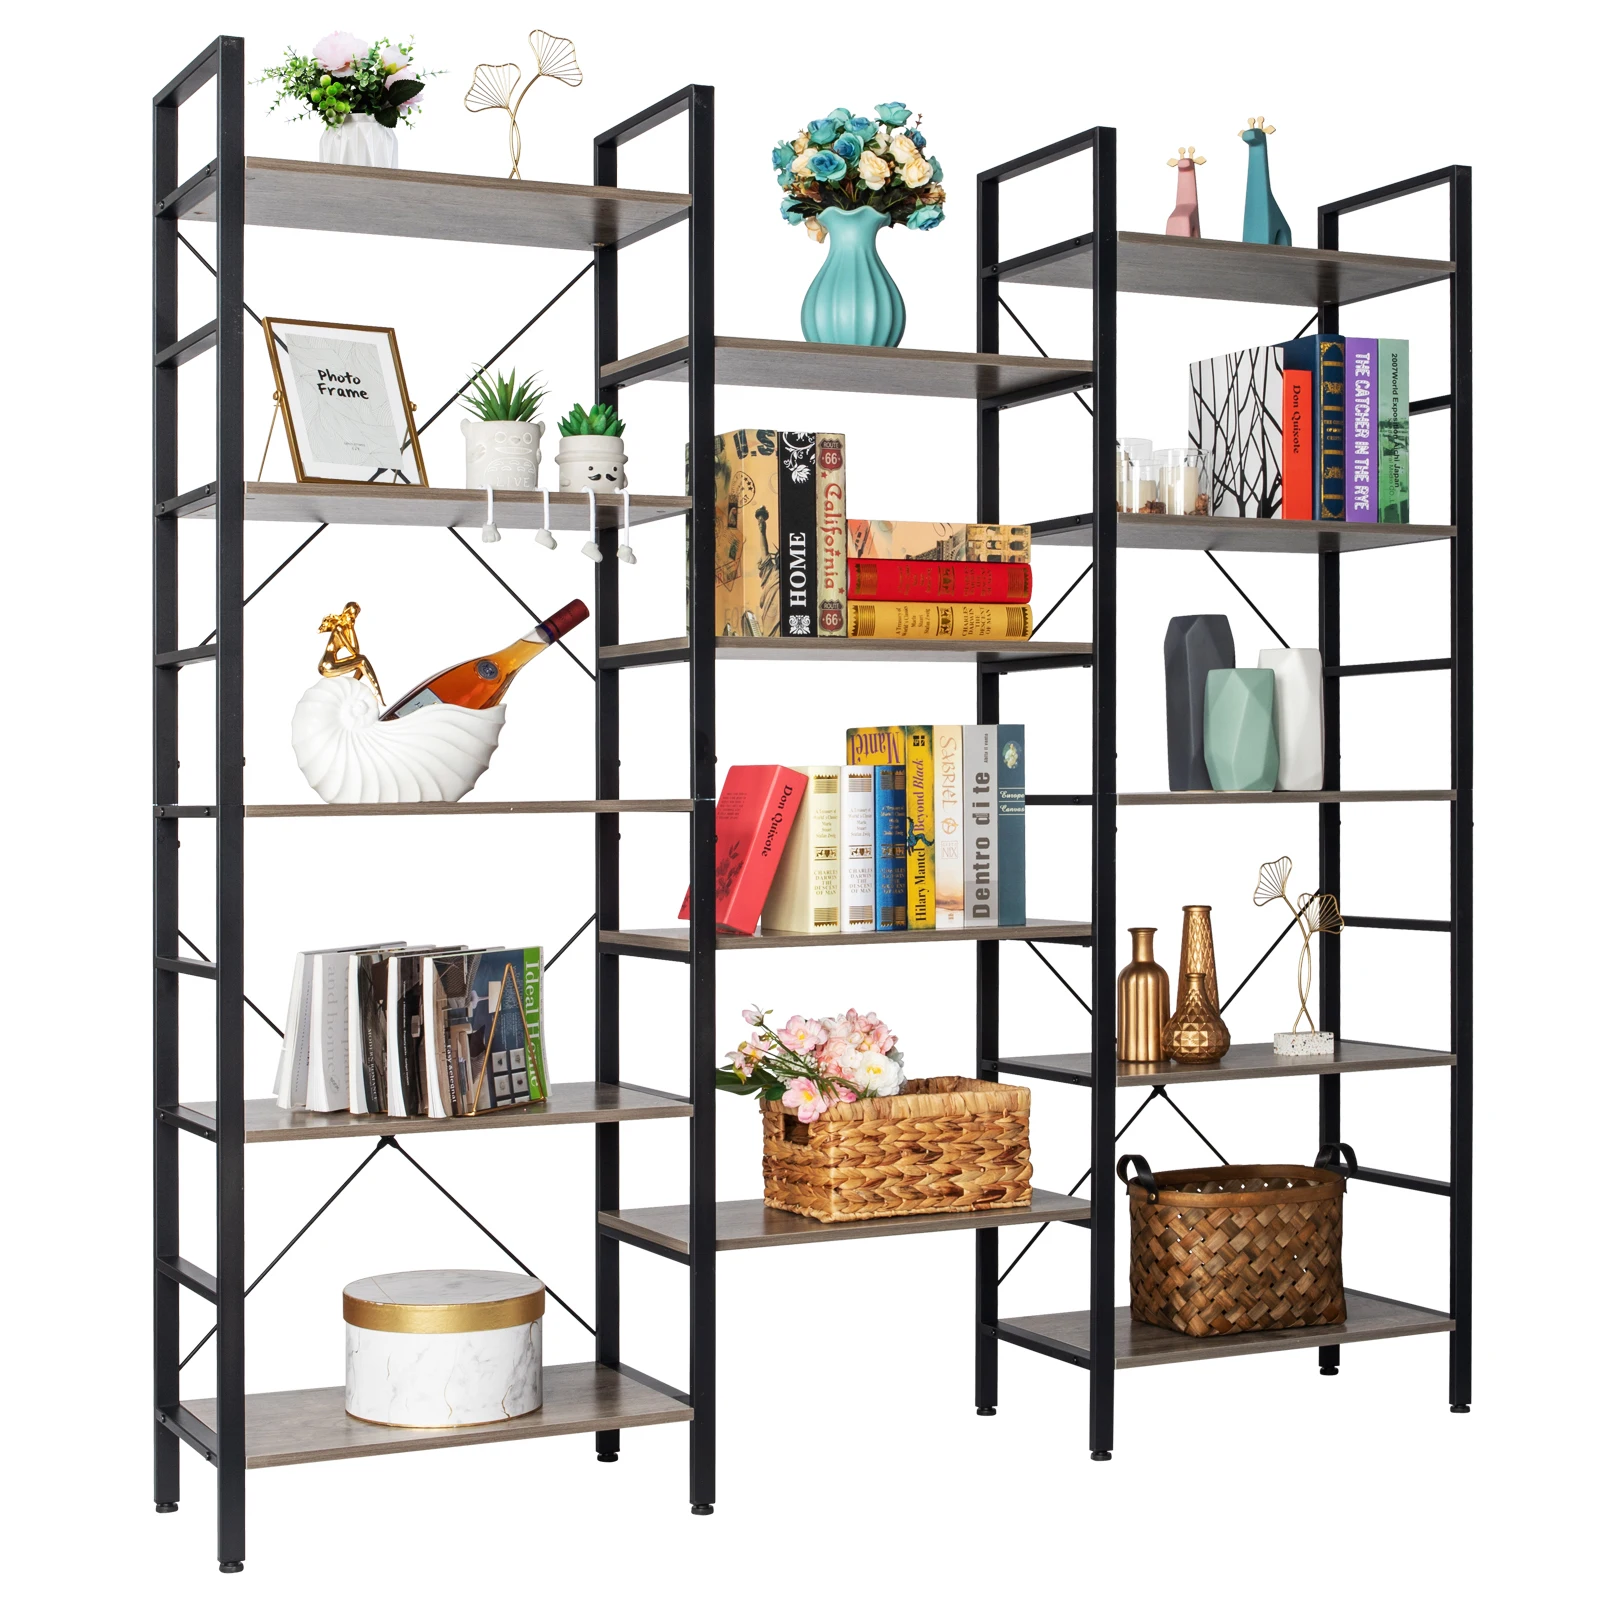 

Triple Wide 5-Shelf Bookcase Etagere Large Open Bookshelf Vintage Industrial Style Shelves Wood and Metal bookcases Furniture